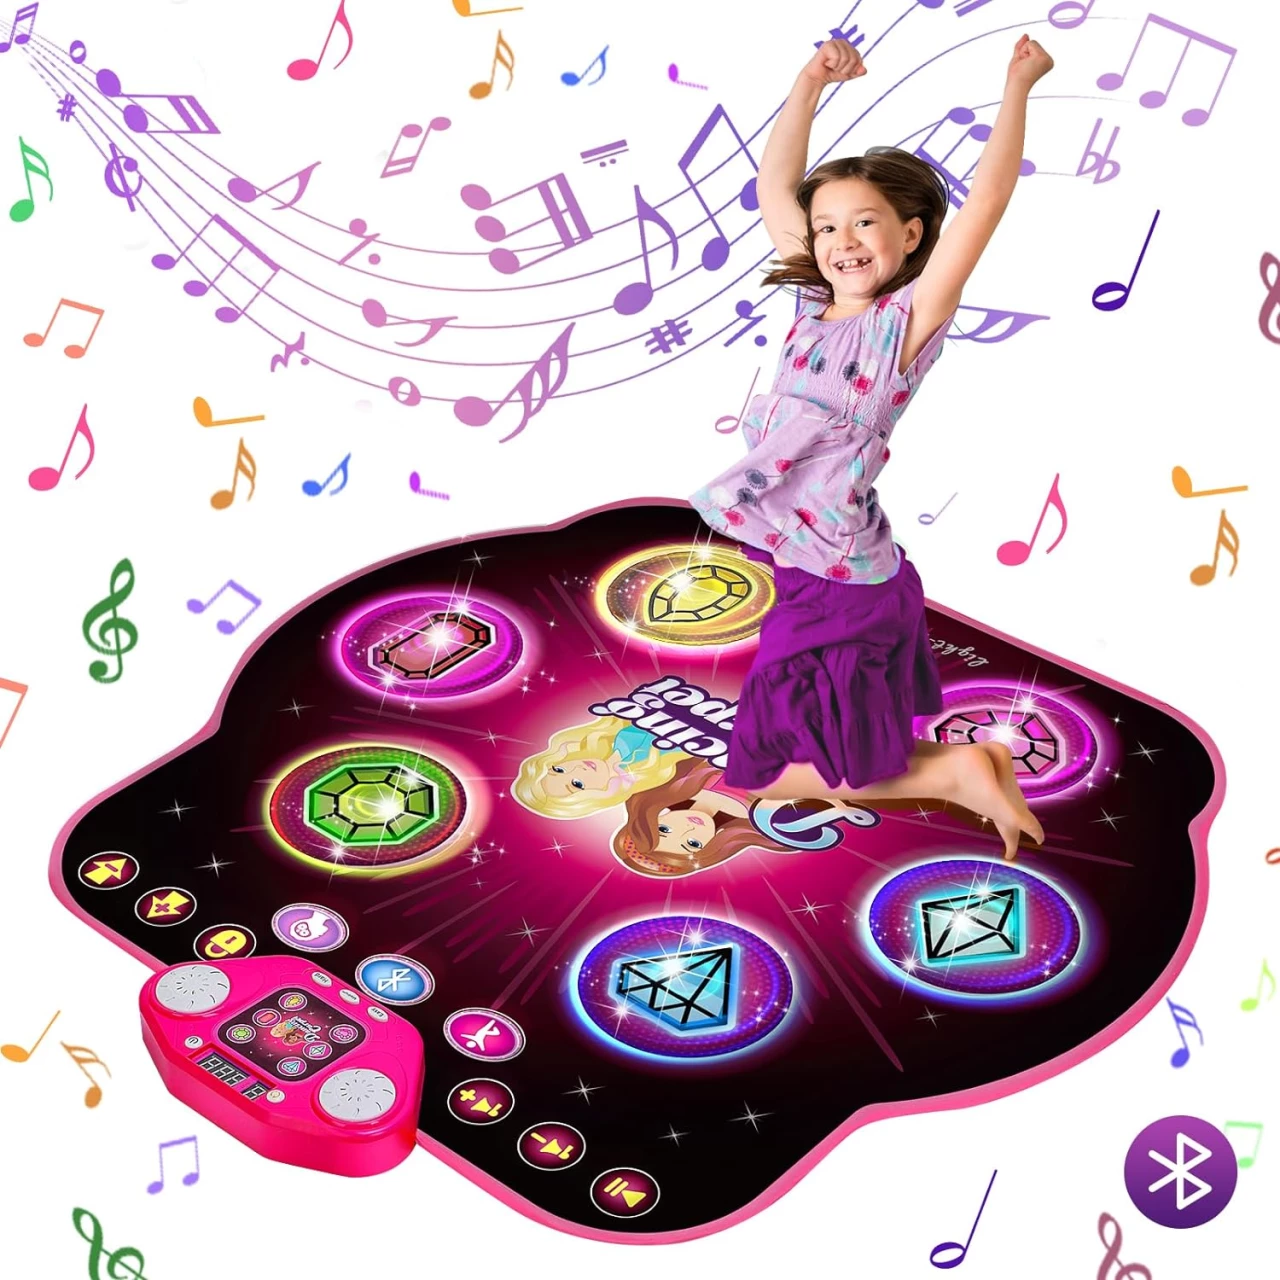 VATOS Dance Mat for Kids - Light Up Dance Pad 27 Levels Dance Challenge Game Mat, with Wireless Bluetooth|Difficulty lock|5 Game Modes|Built in Music, Boys &amp; Girls Toys Ages 3 4 5 6 7 8 Year Old Gifts